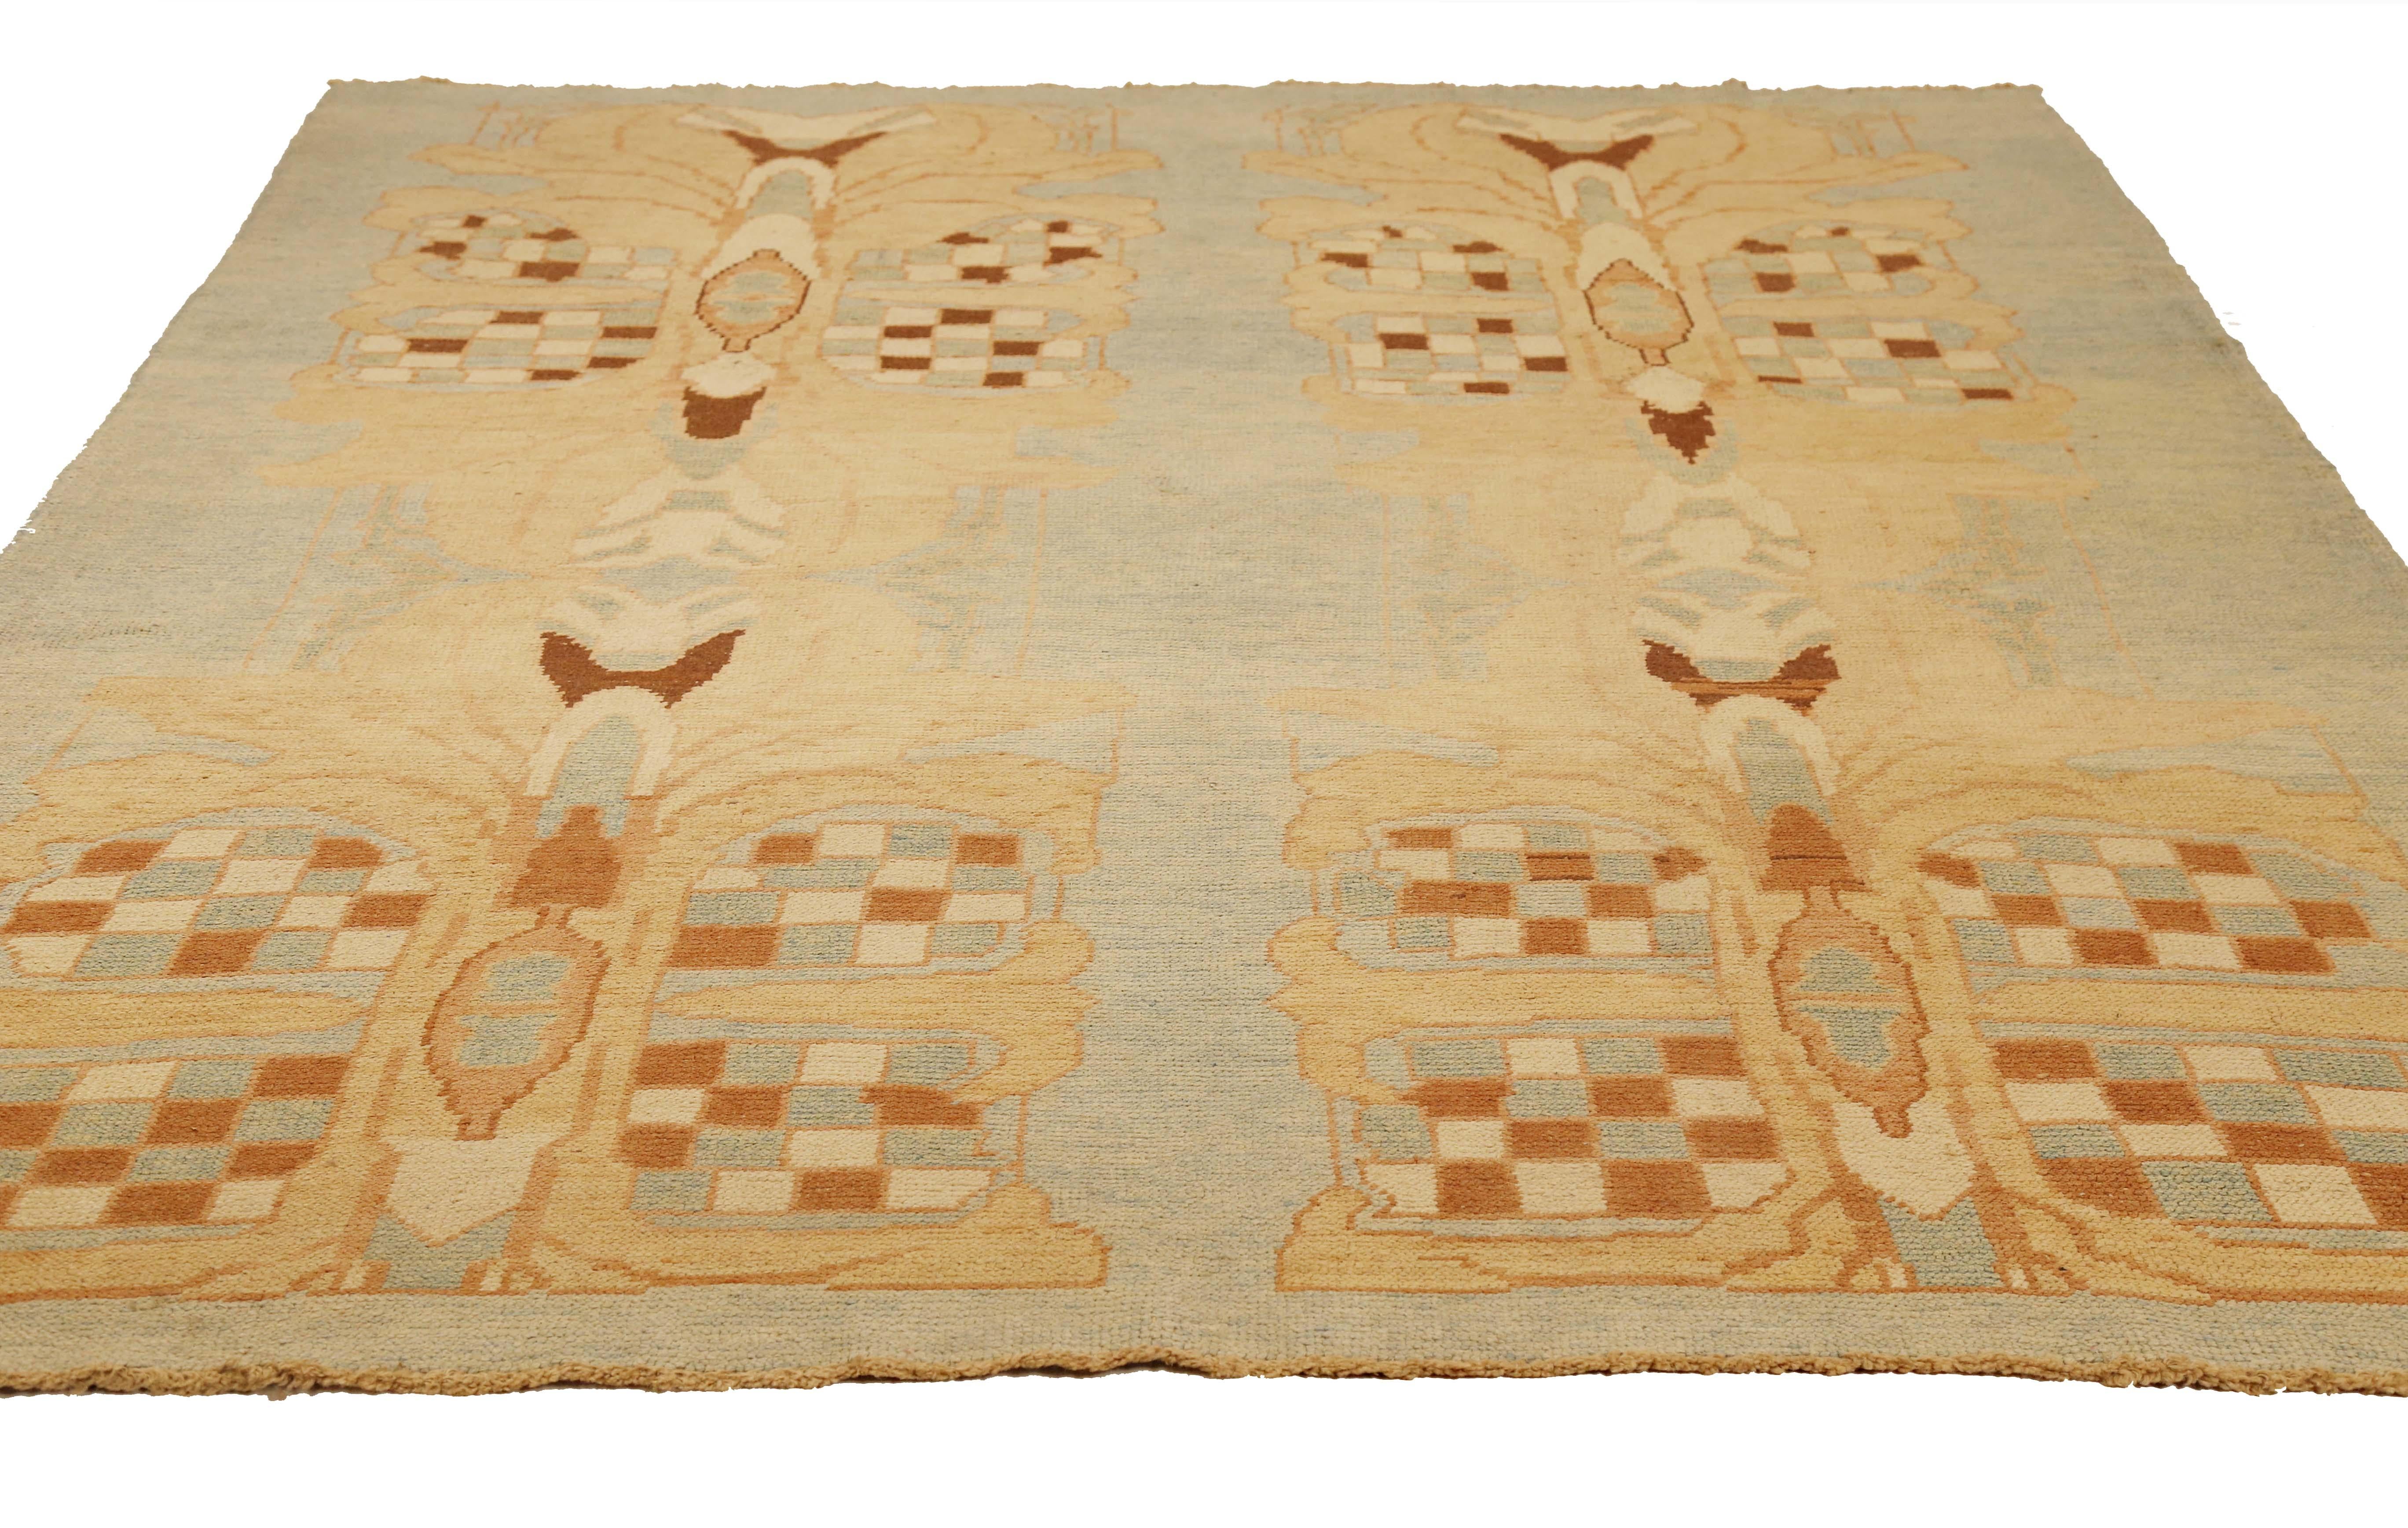 Modern handmade Turkish rug from high-quality sheep’s wool and colored with eco-friendly vegetable dyes that are proven safe for humans and pets alike. It’s a Donegal design showcasing a blue field with beautiful brown and beige botanical details.